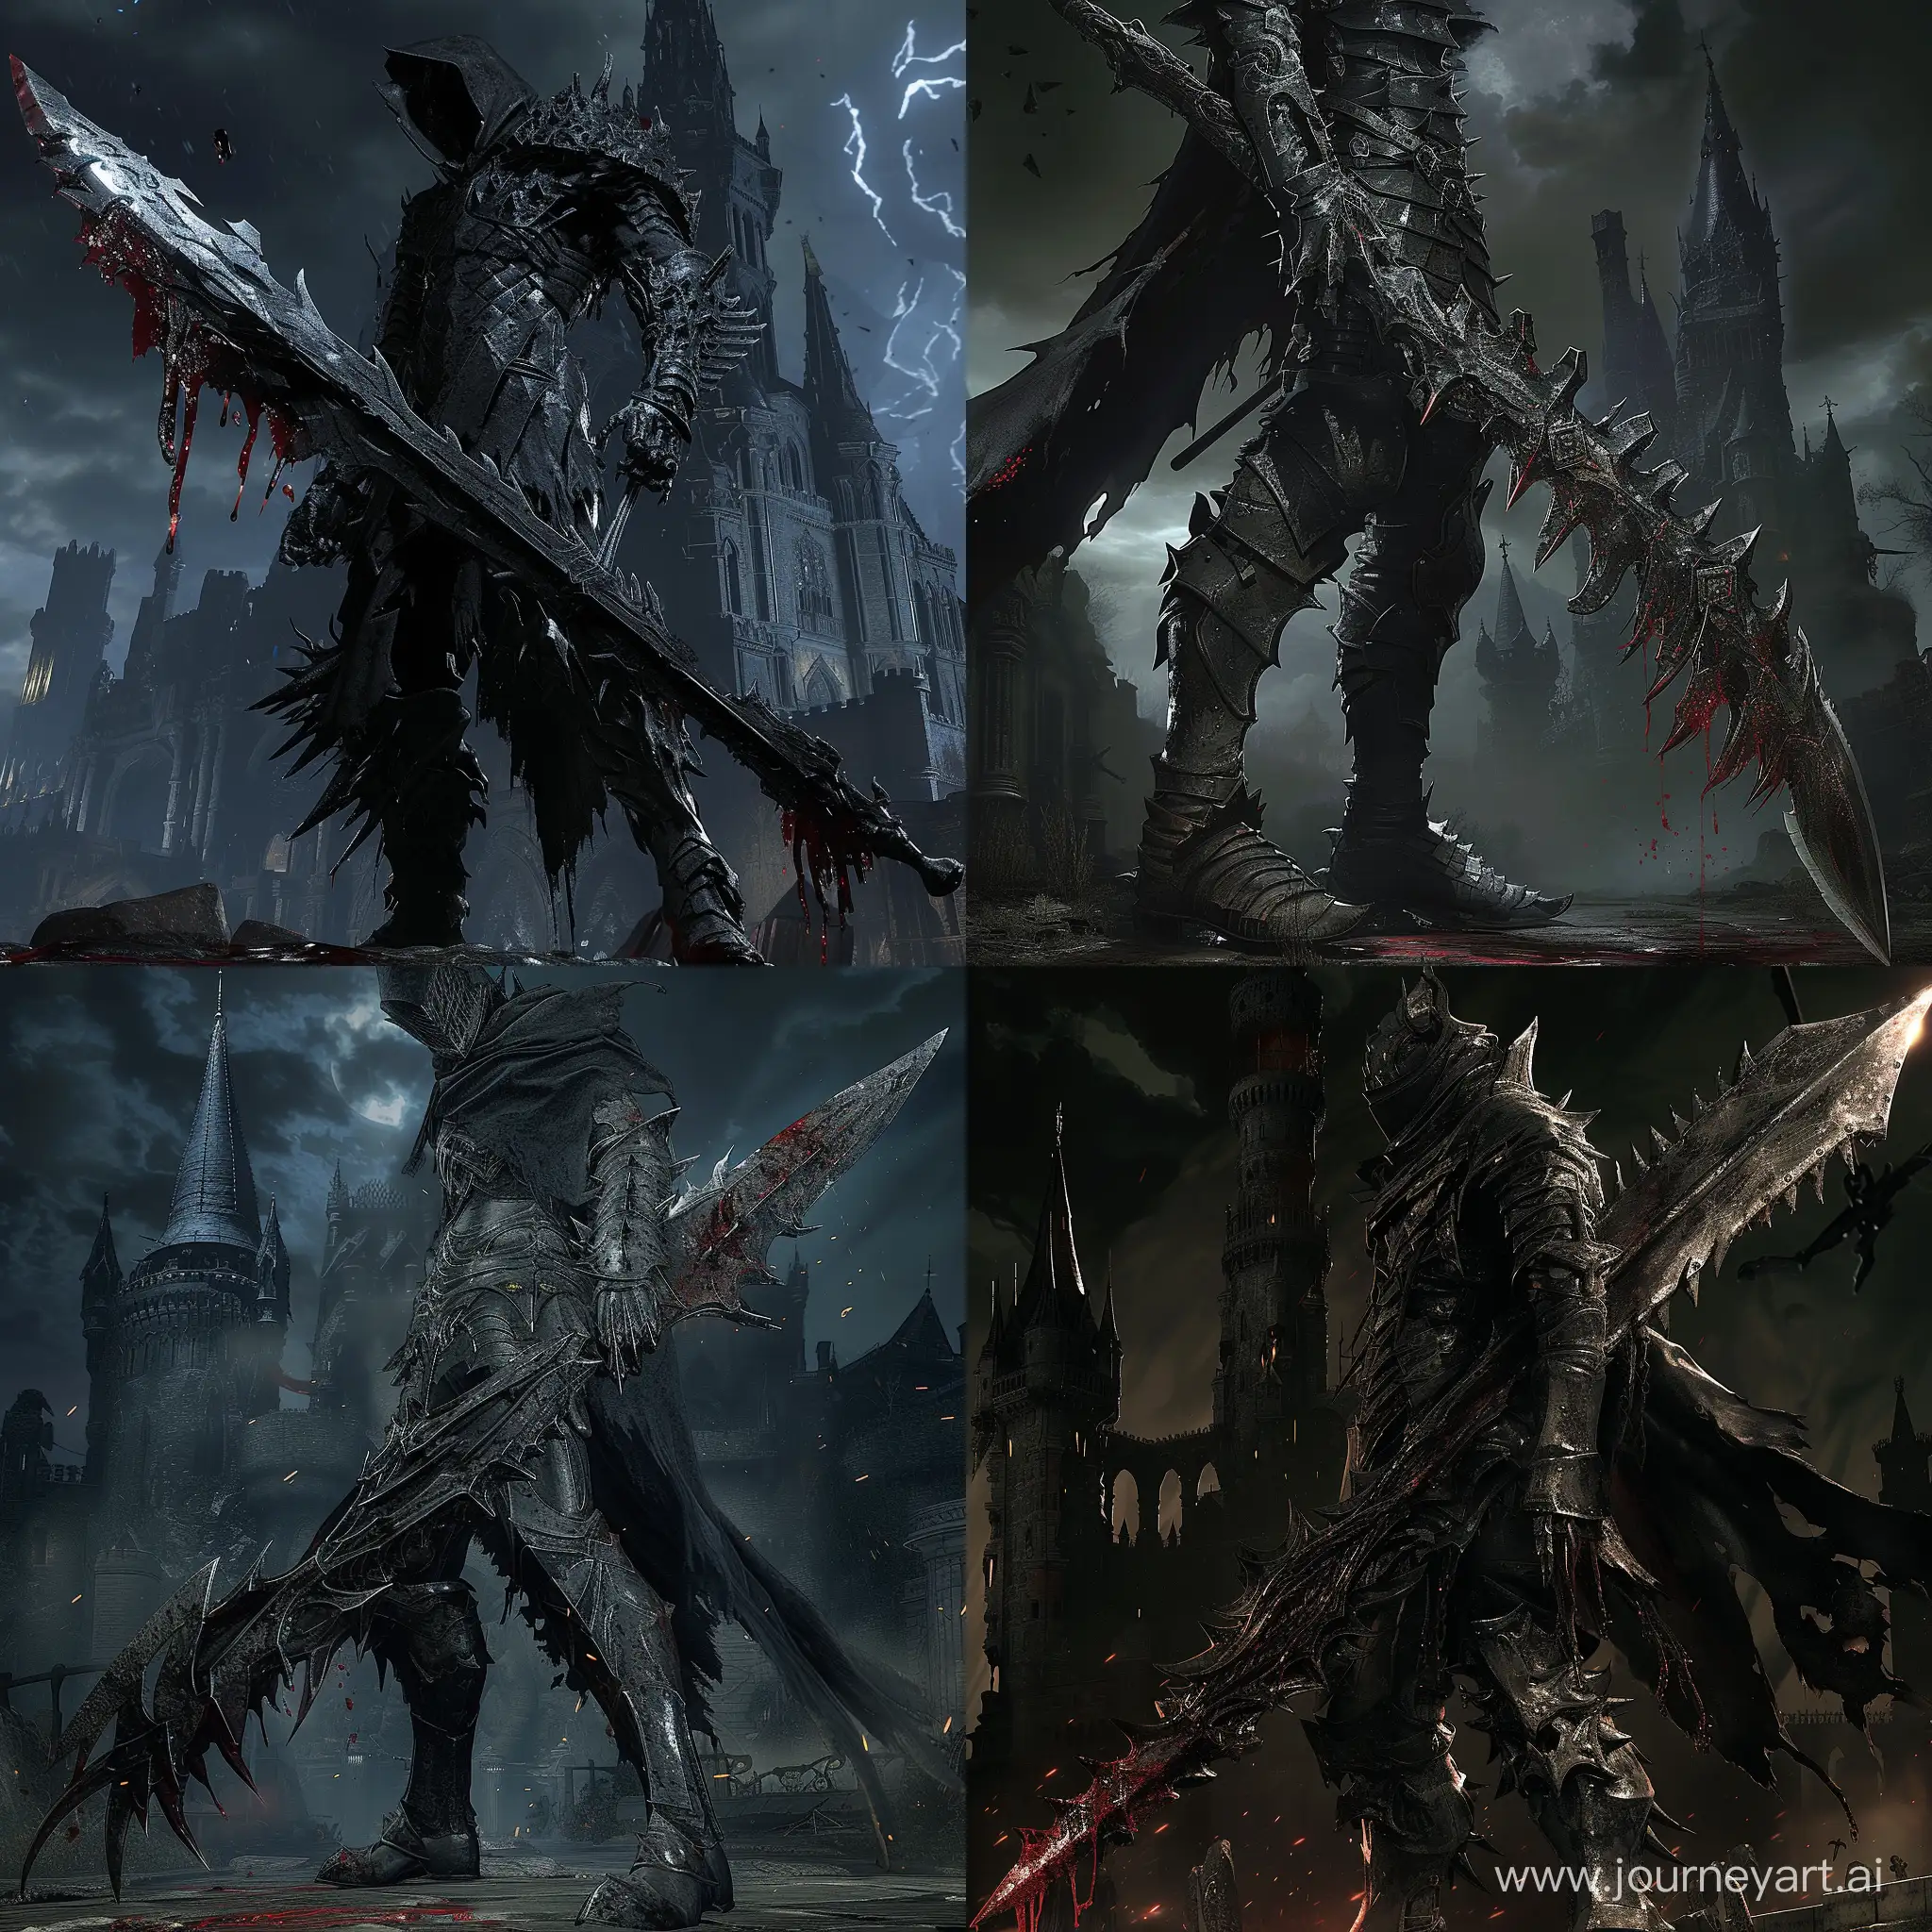 a man wearing, Jet-black, obsidian-plated armor with angular, intimidating design, Obsidian gauntlets with razor-sharp claws, Sturdy, soundproof boots for silent advances, Wield the "Shadowforge Cleaver," a massive obsidian greatsword, dark castle in the background ,  bloodborne aesthetic, 1970's dark fantasy, detailed, cosmic horror, gritty, dark lighting, edgy, blood on weapon, 64 bit